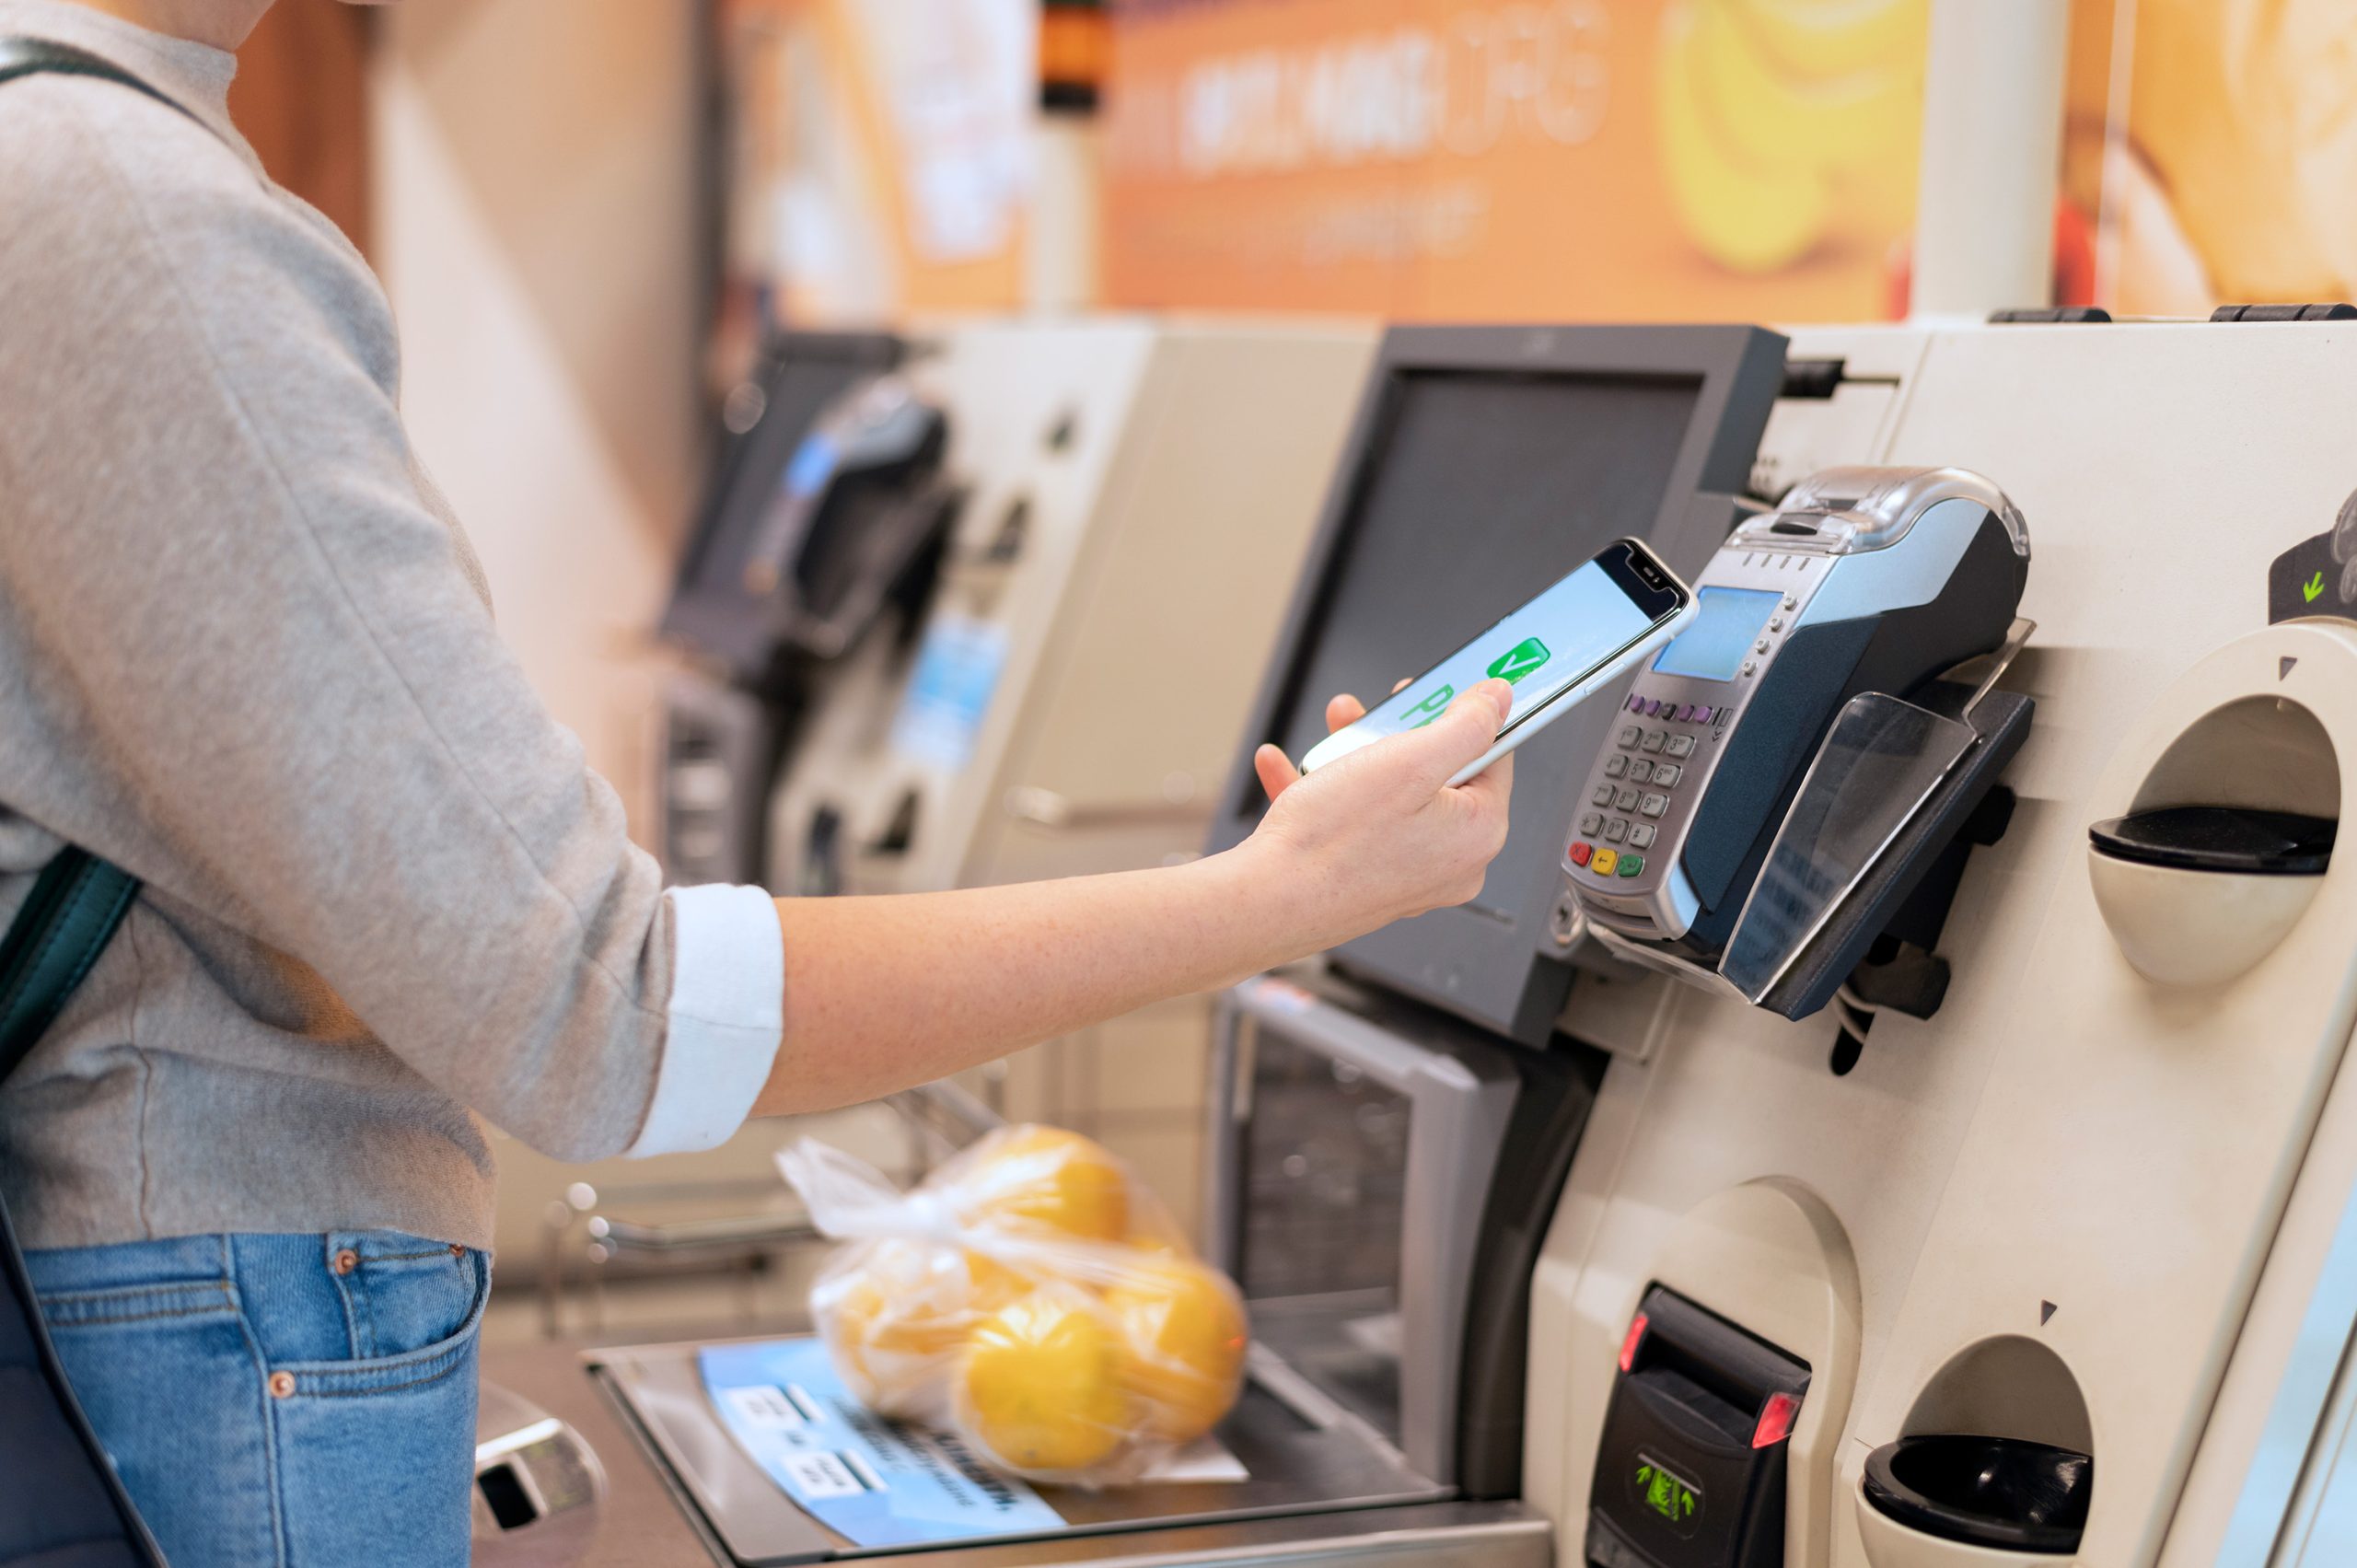 Risks and opportunities of the new checkout methods